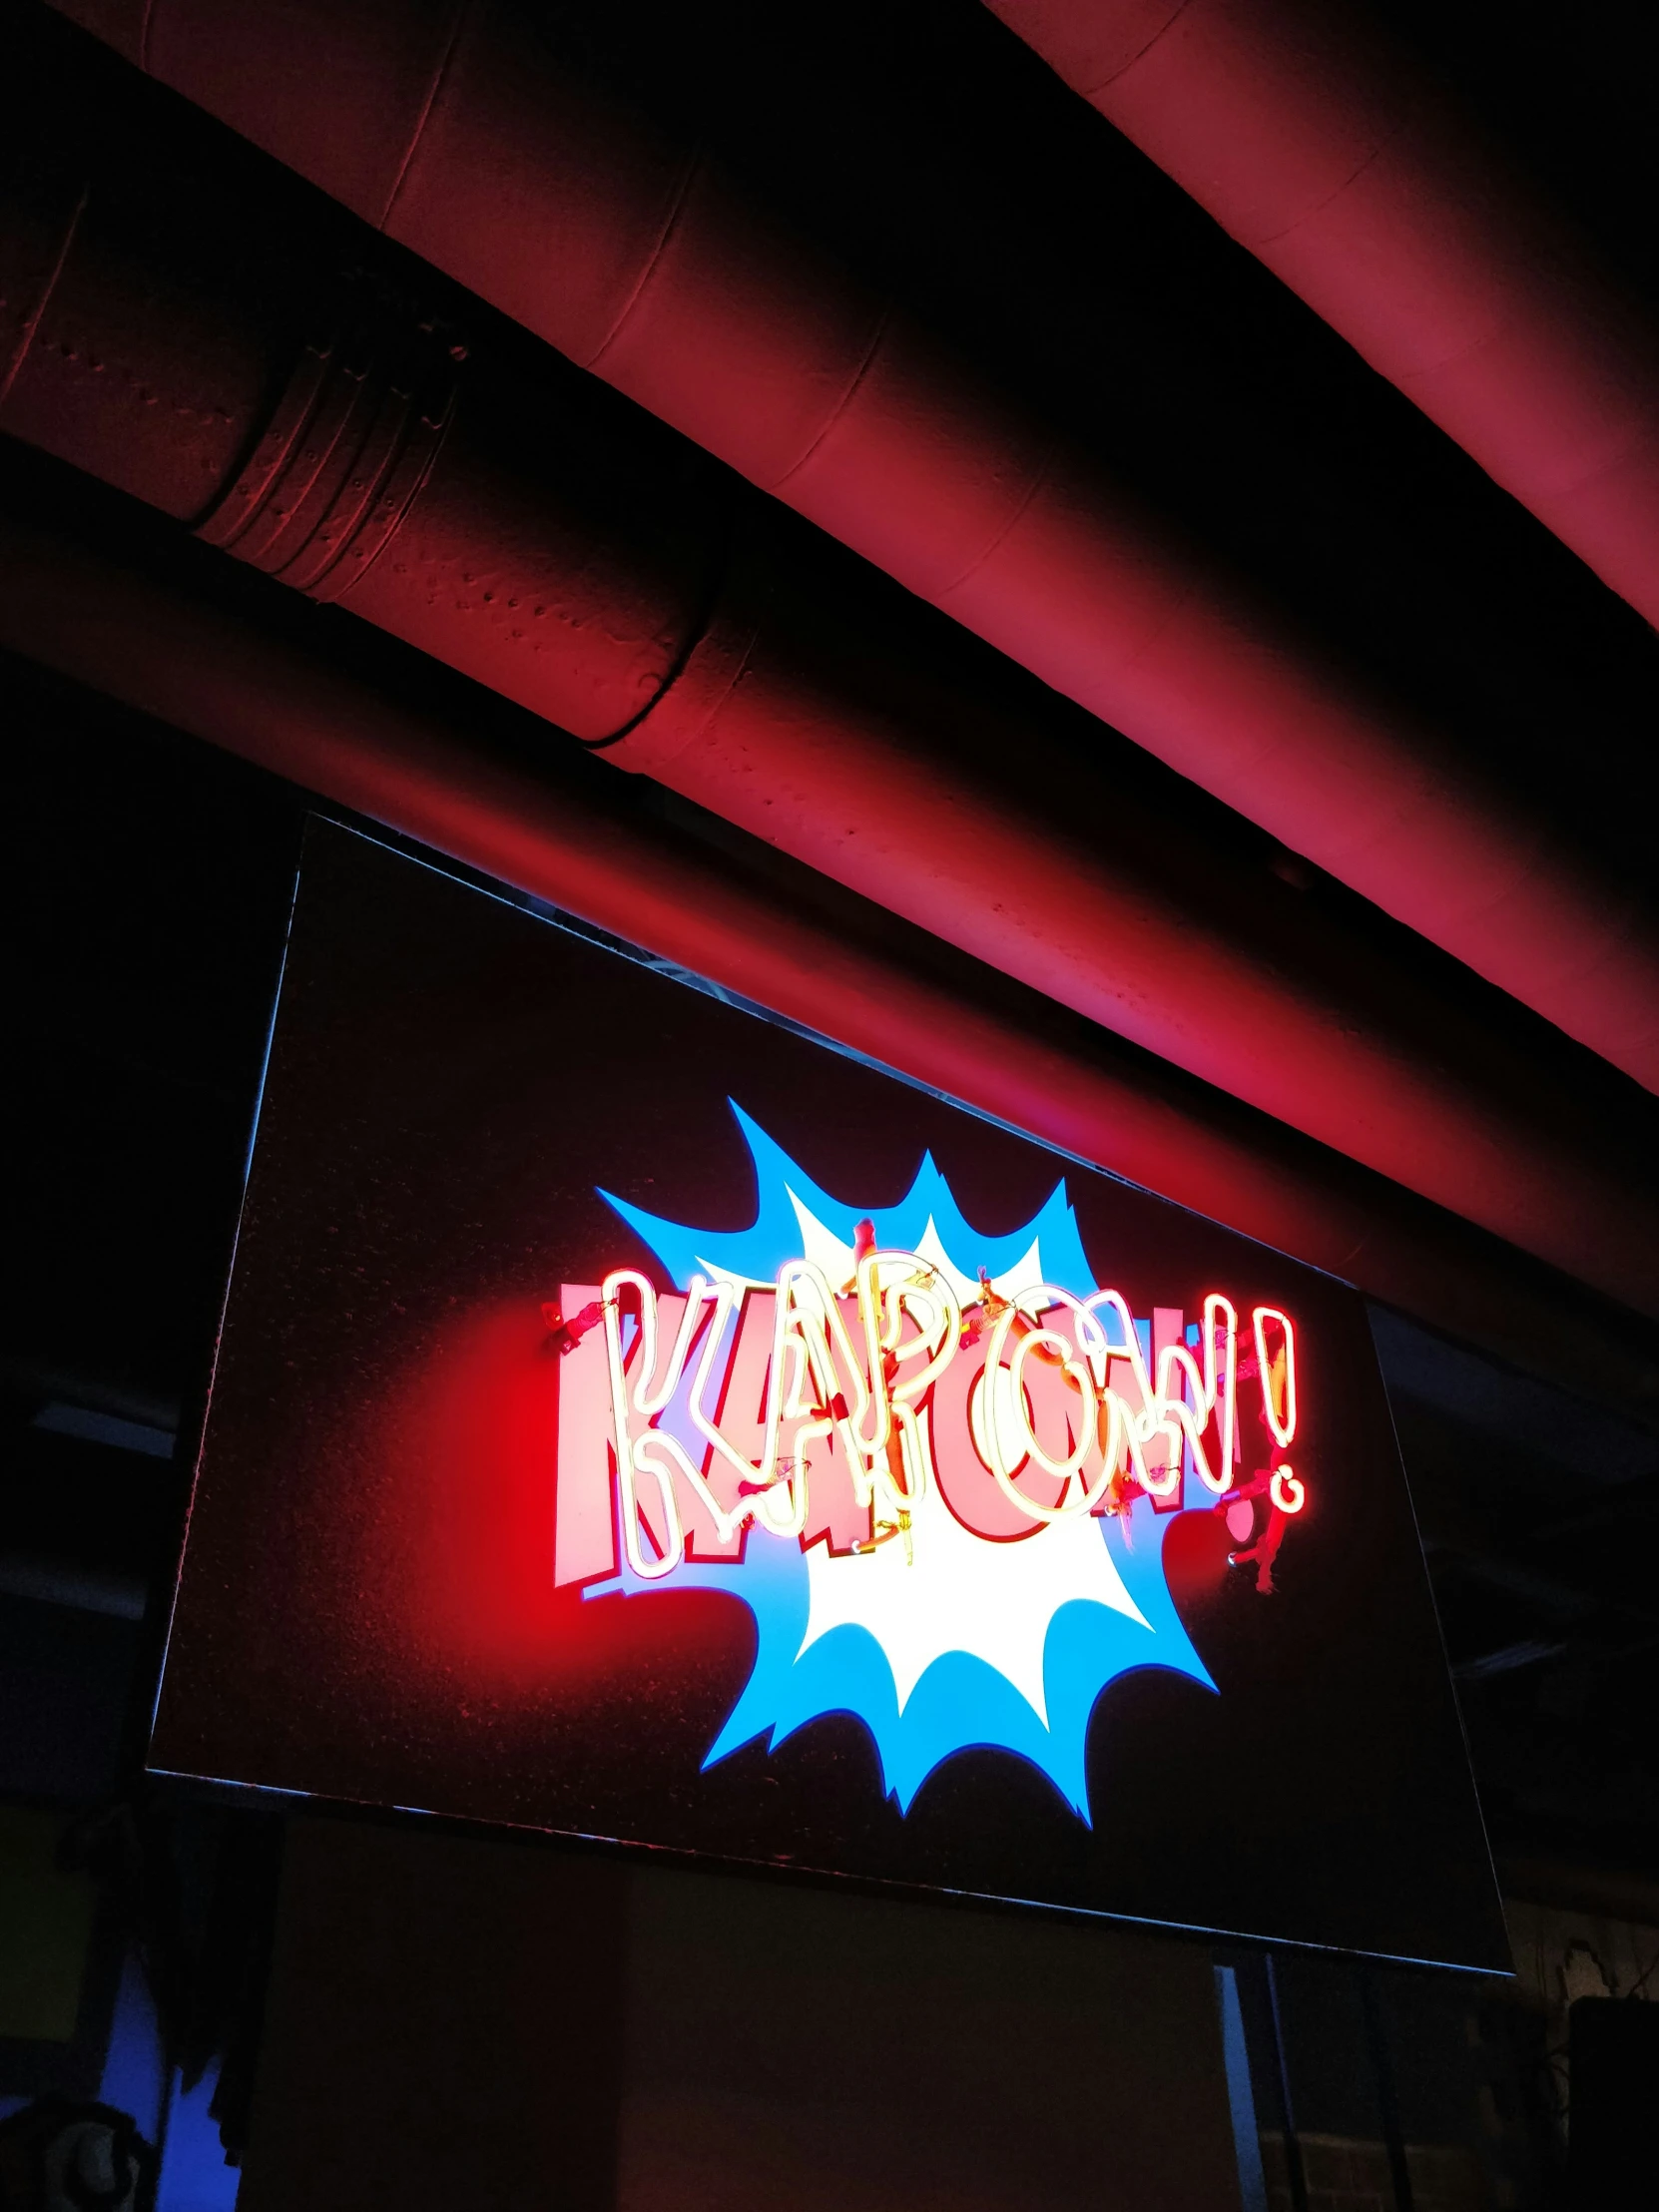 a very colorful neon sign advertising krasowy